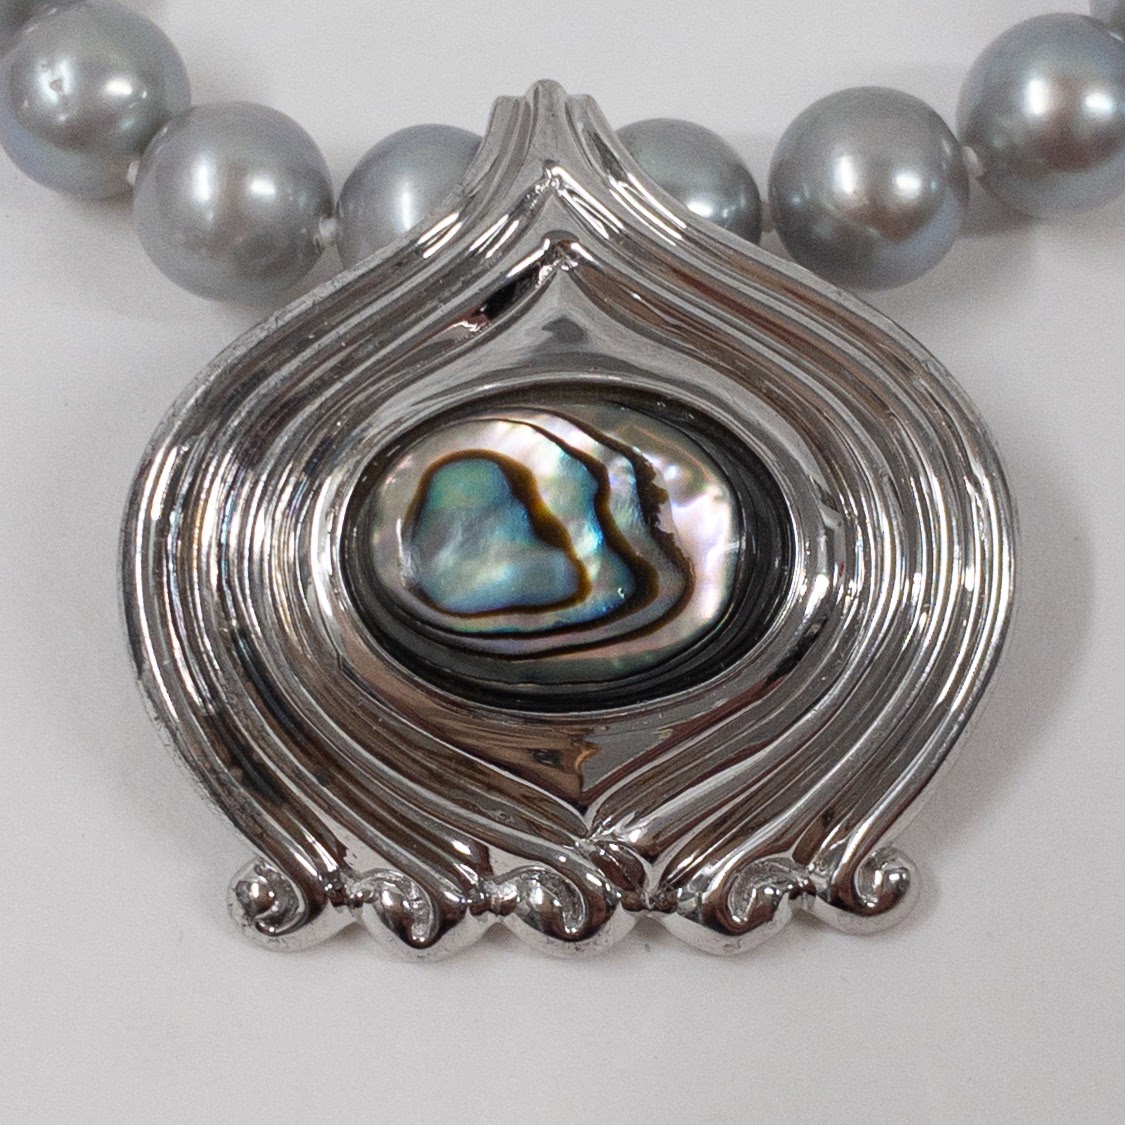 Pearl, Sterling Silver, and Abalone Metropolitan Museum of Art Necklace and Pendant